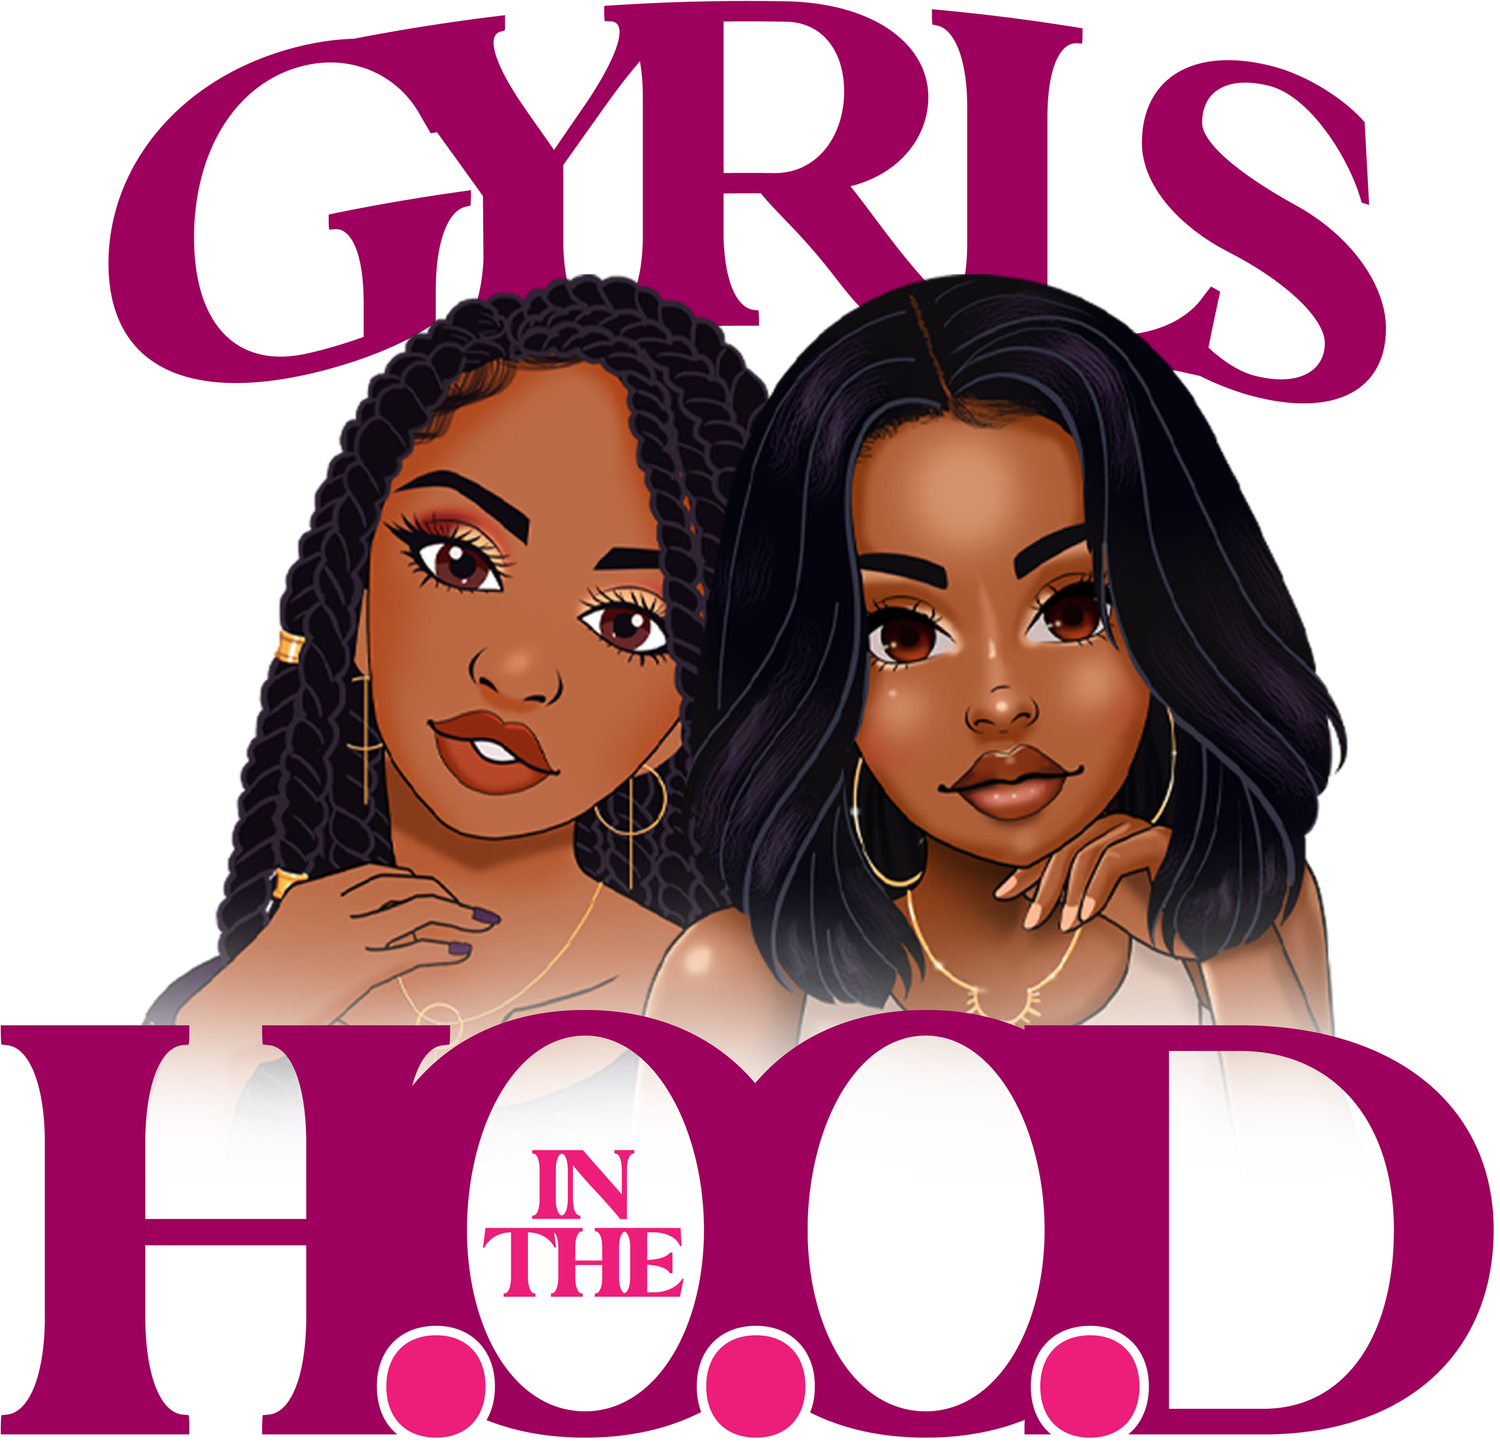 Gyrls in the H.O.O.D.